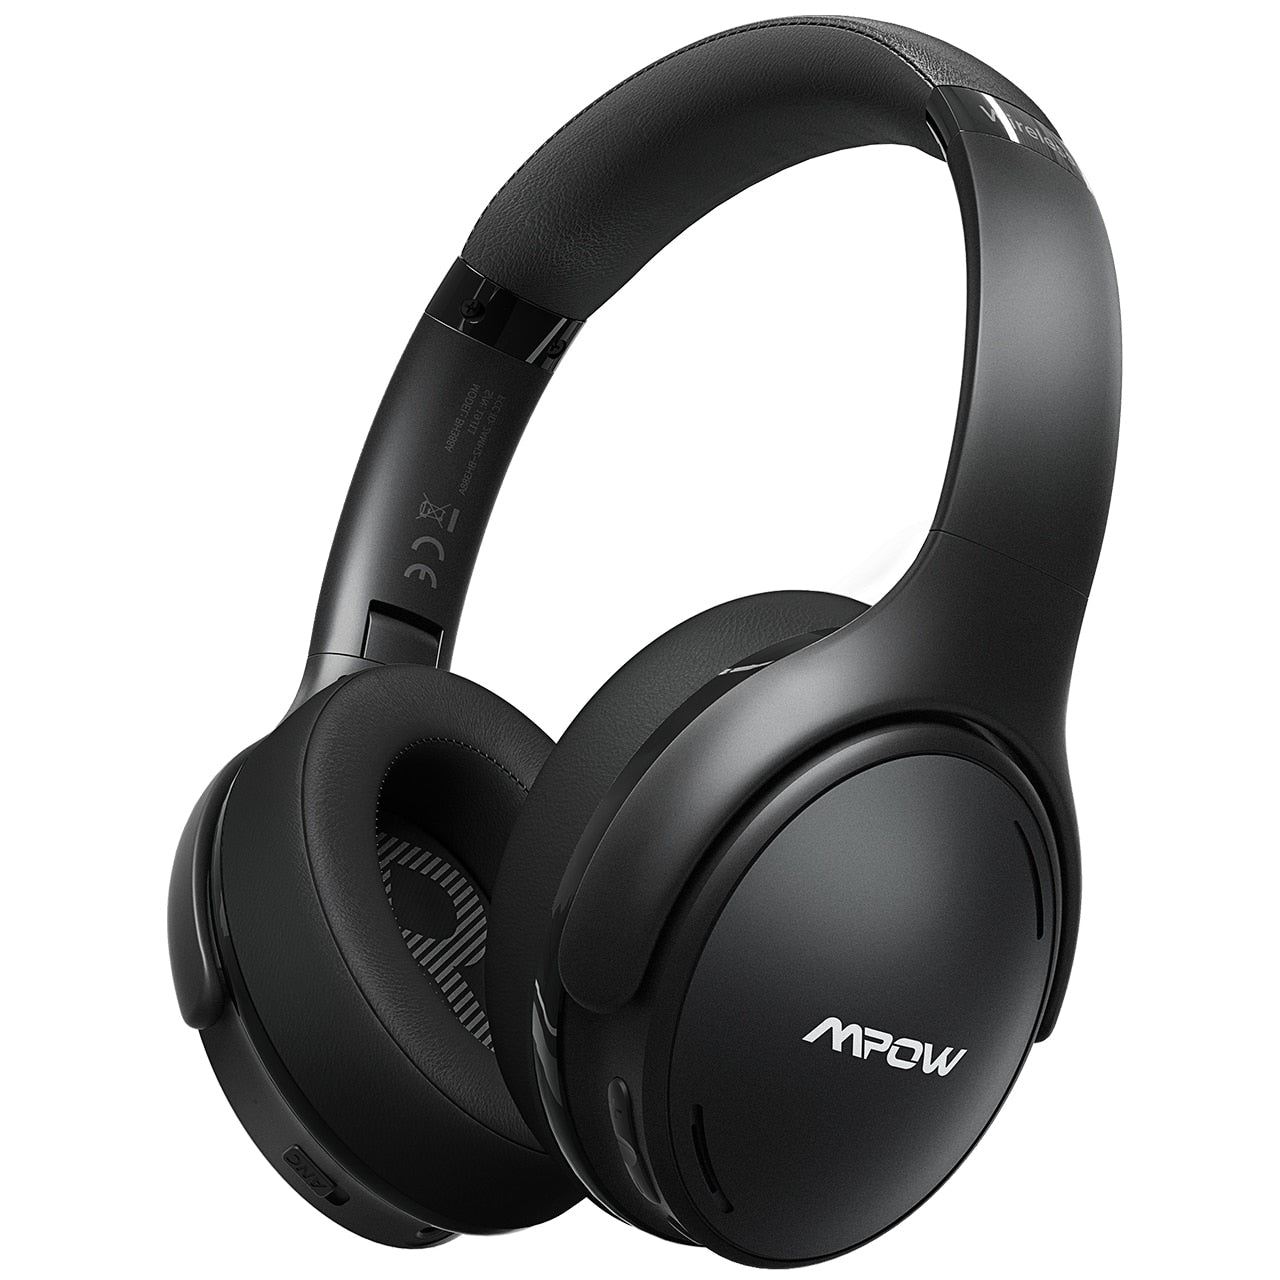 Wireless Headset MPOW H19 IPO Bluetooth 5.0 Active Noise Cancelling Headphones Lightweight Wireless Headset CVC 8.0 Mic 30hrs Playing Fast Charge